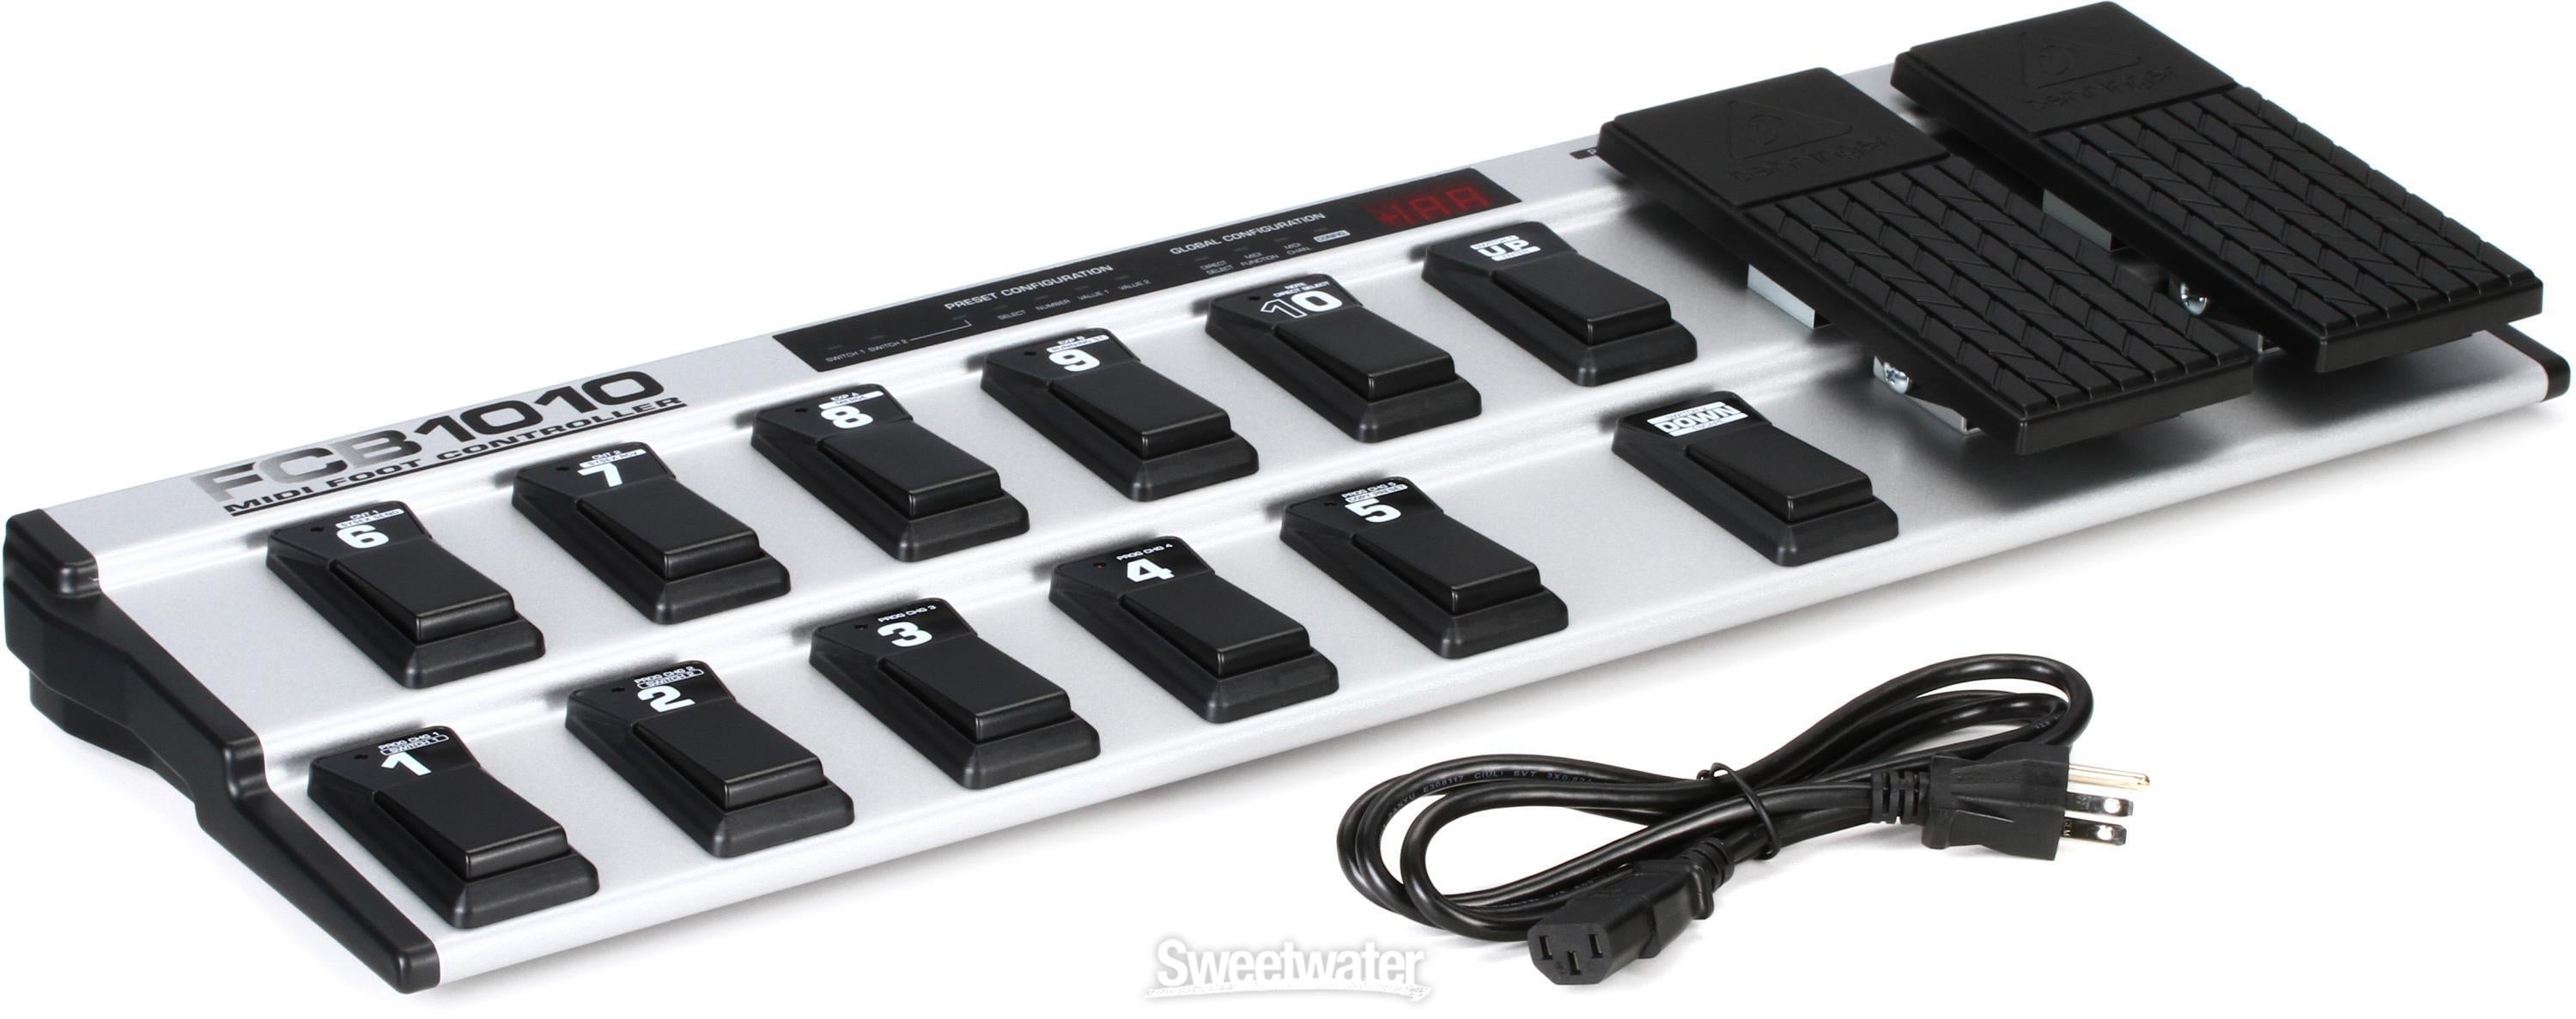 Behringer FCB1010 MIDI Foot Controller | Sweetwater